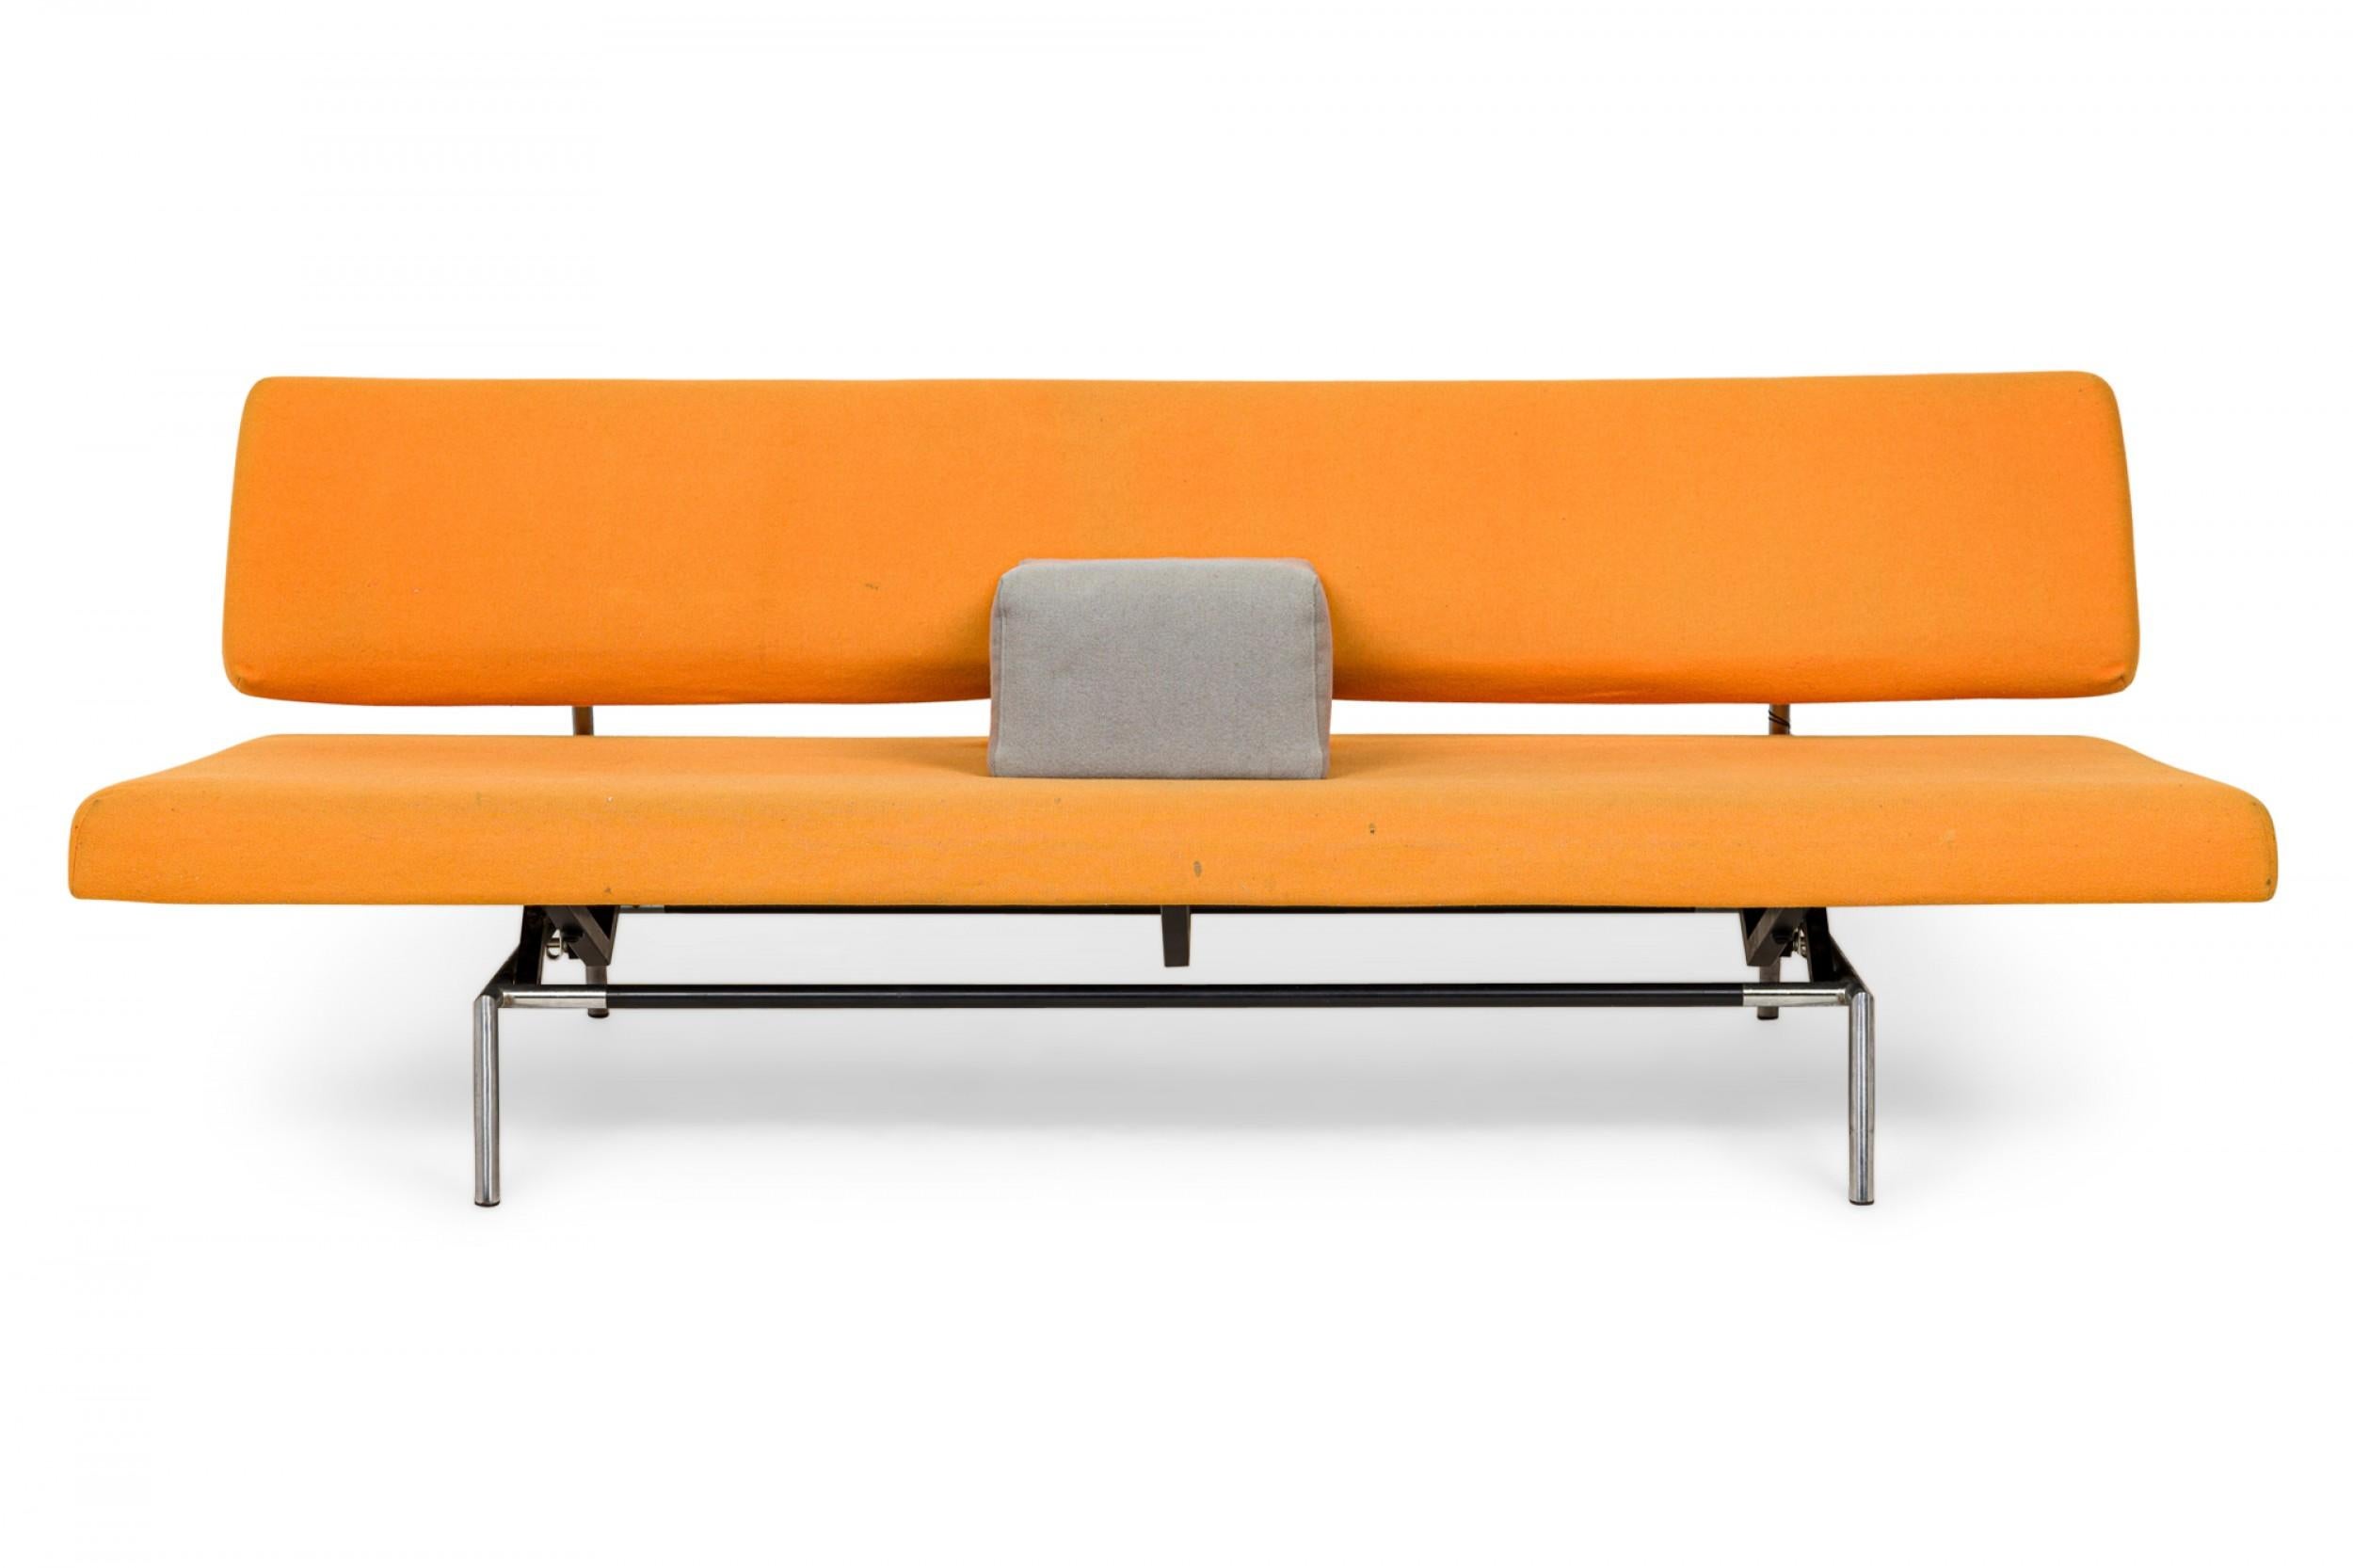 Mid-Century Modern sleeper sofa with orange felt upholstered seat and back supported by a silver metal frame with a shifting mechanism that allows the sofa to convert to a daybed, with a square blue upholstered movable pillow/armrest. (MARTIN VISSER